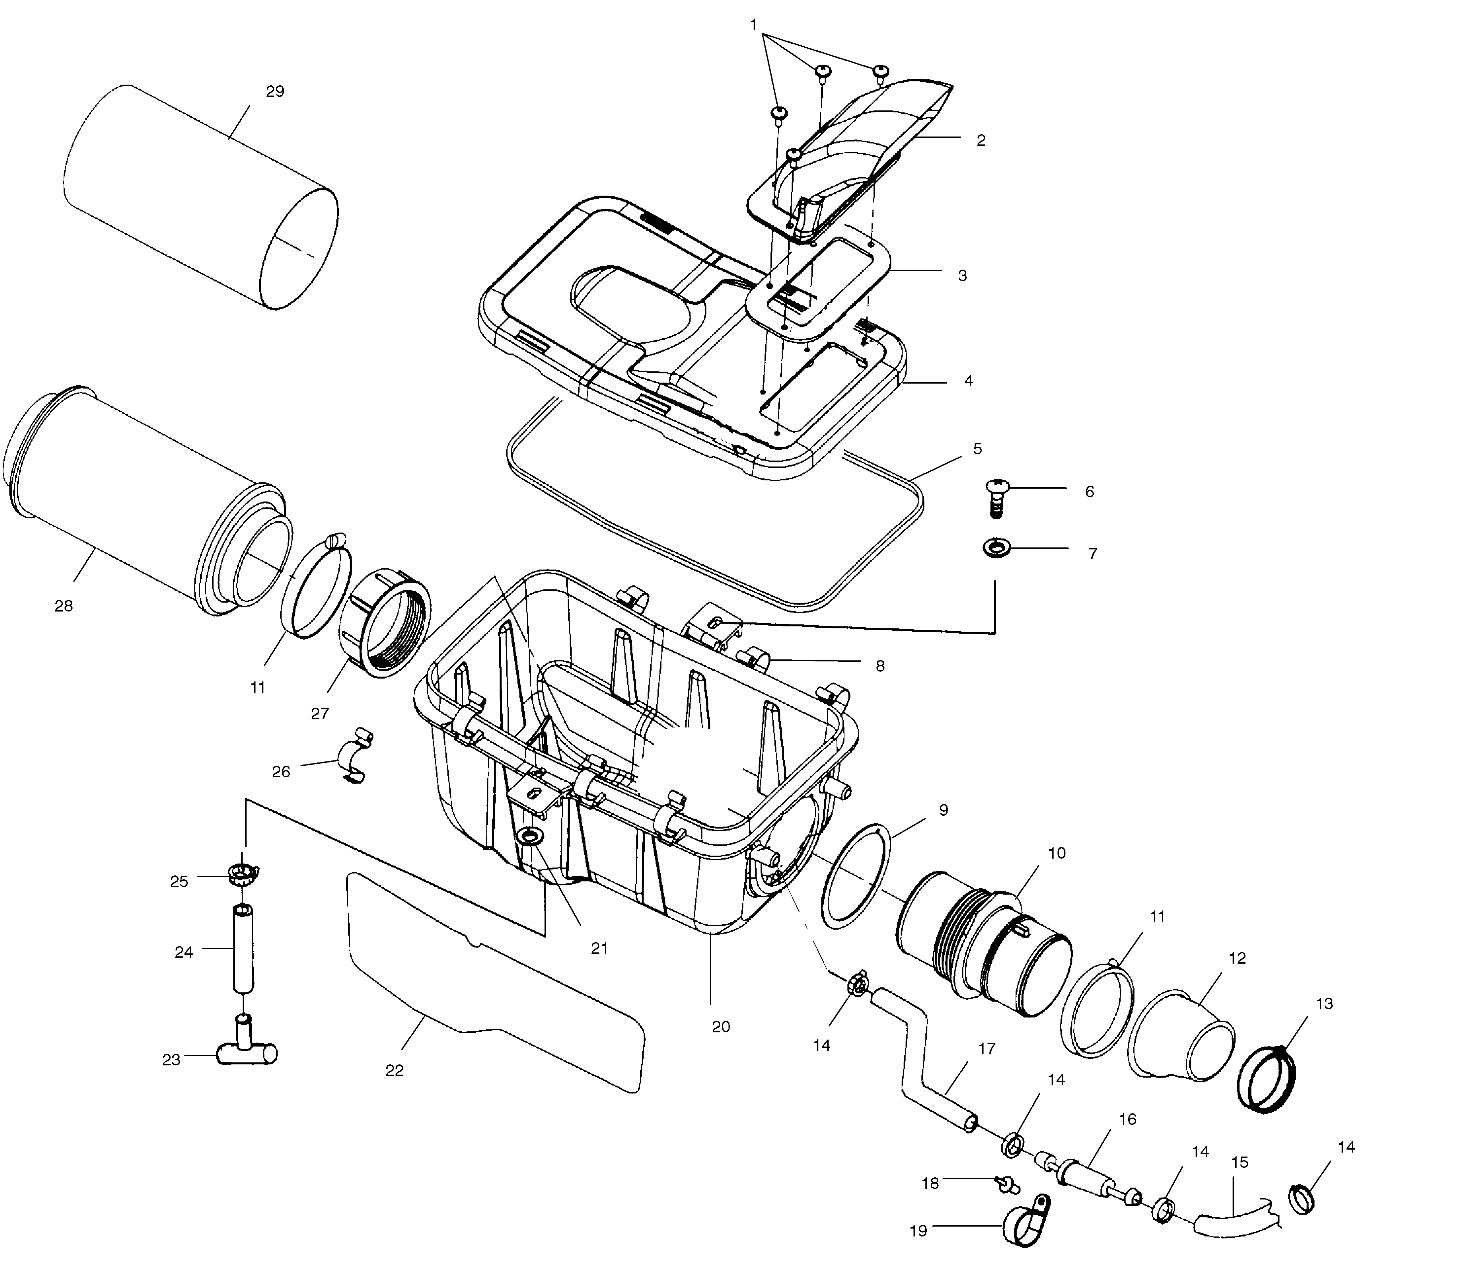 Part Number : 5411539 BOOT CARB (425 MAN)